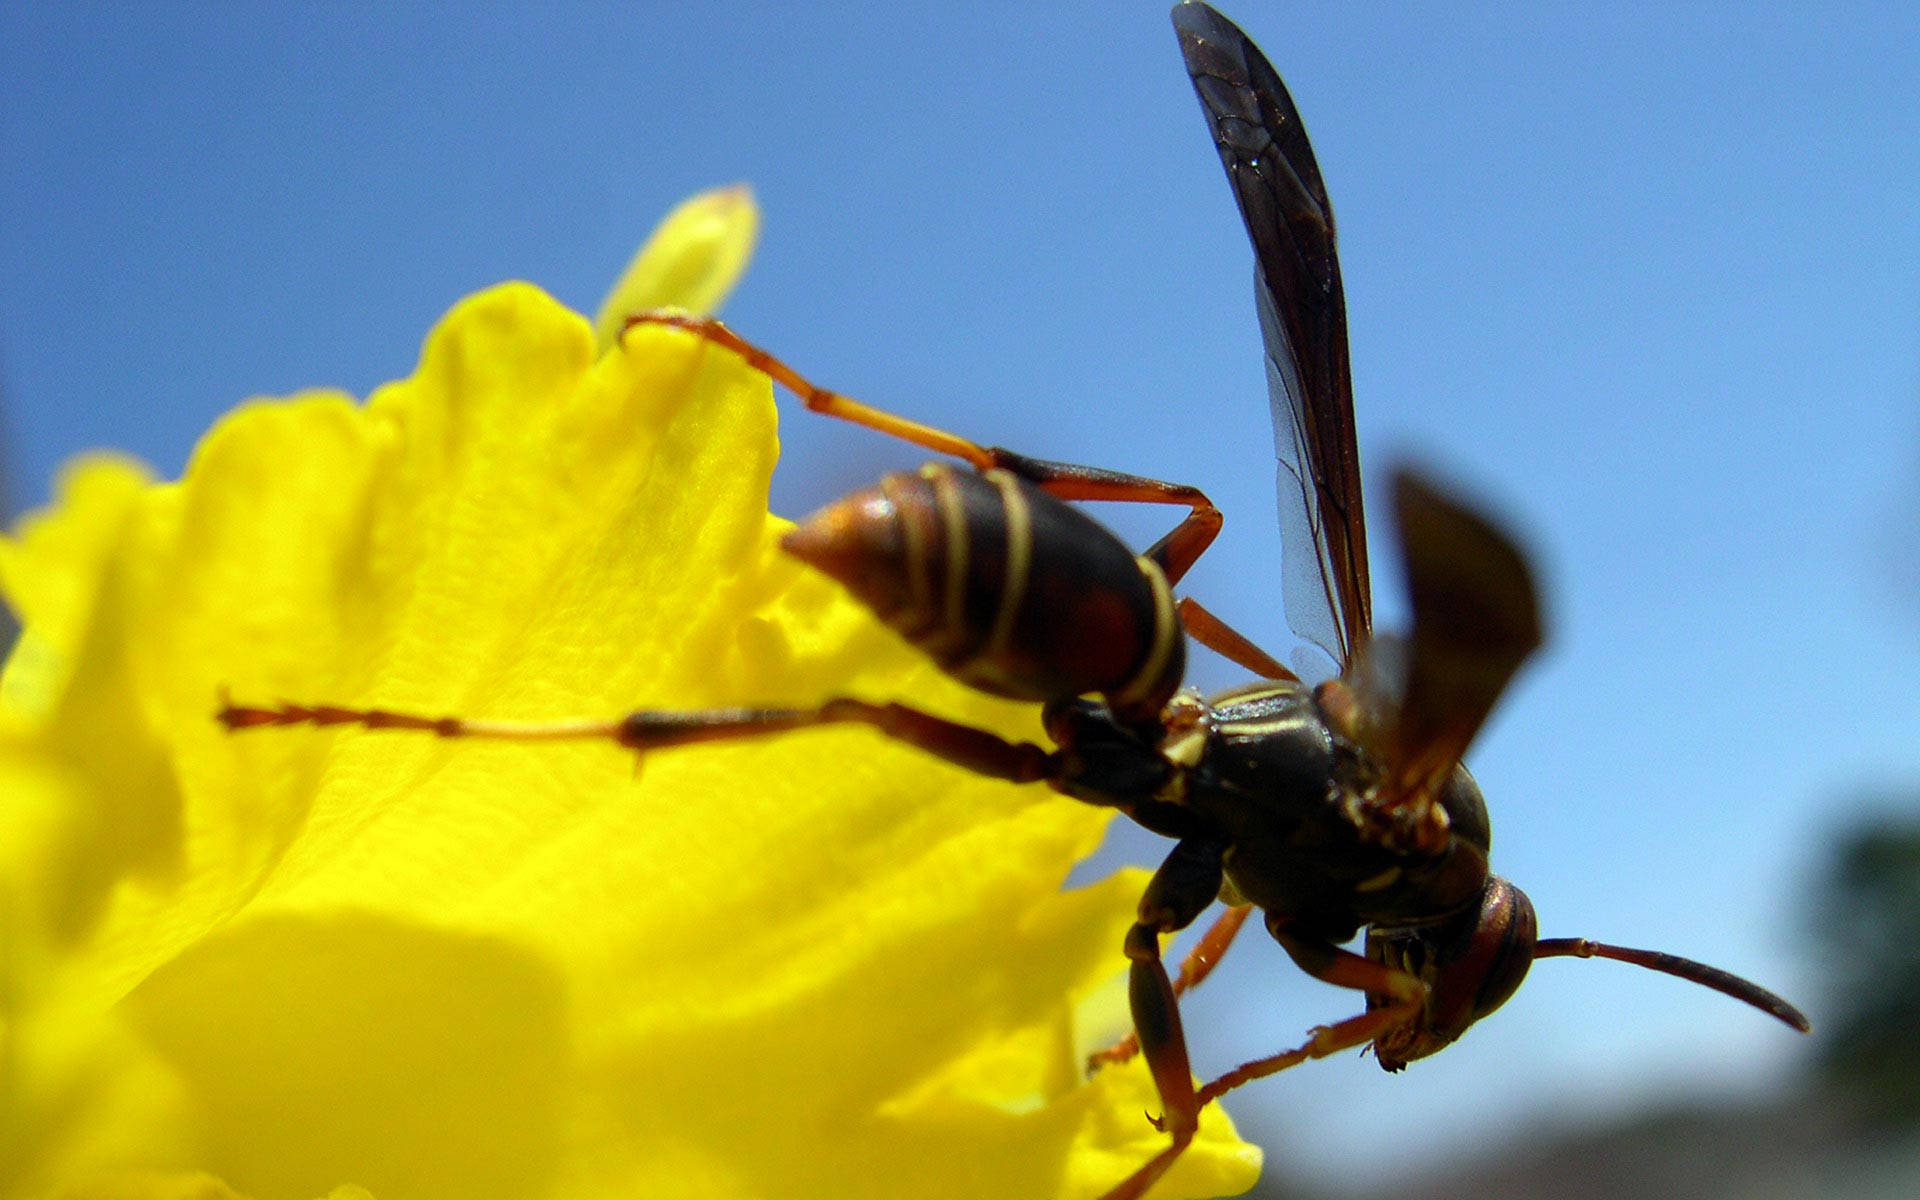 Insect Wasp On Yellow Flower Wallpaper